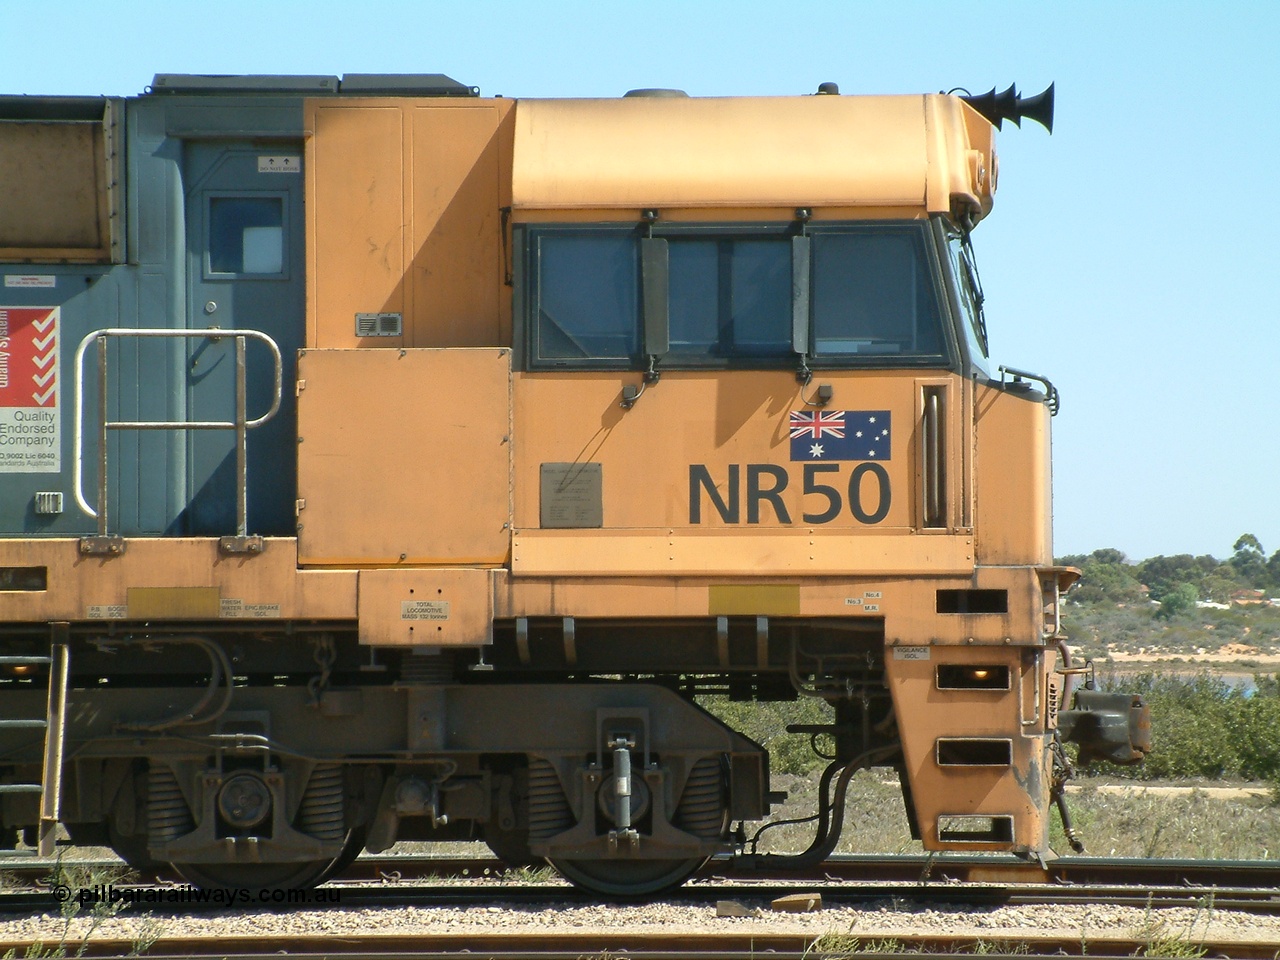 030404 125349
Port Augusta Spencer Junction yard, a Perth bound intermodal awaits departure time on 13 Road behind National Rail NR class units built by Goninan as GE Cv40-9i models, NR 50 serial 7250-08 / 97-252. 4th April 2003.
Keywords: NR-class;NR50;7250-08/97-252;Goninan;GE;Cv40-9i;